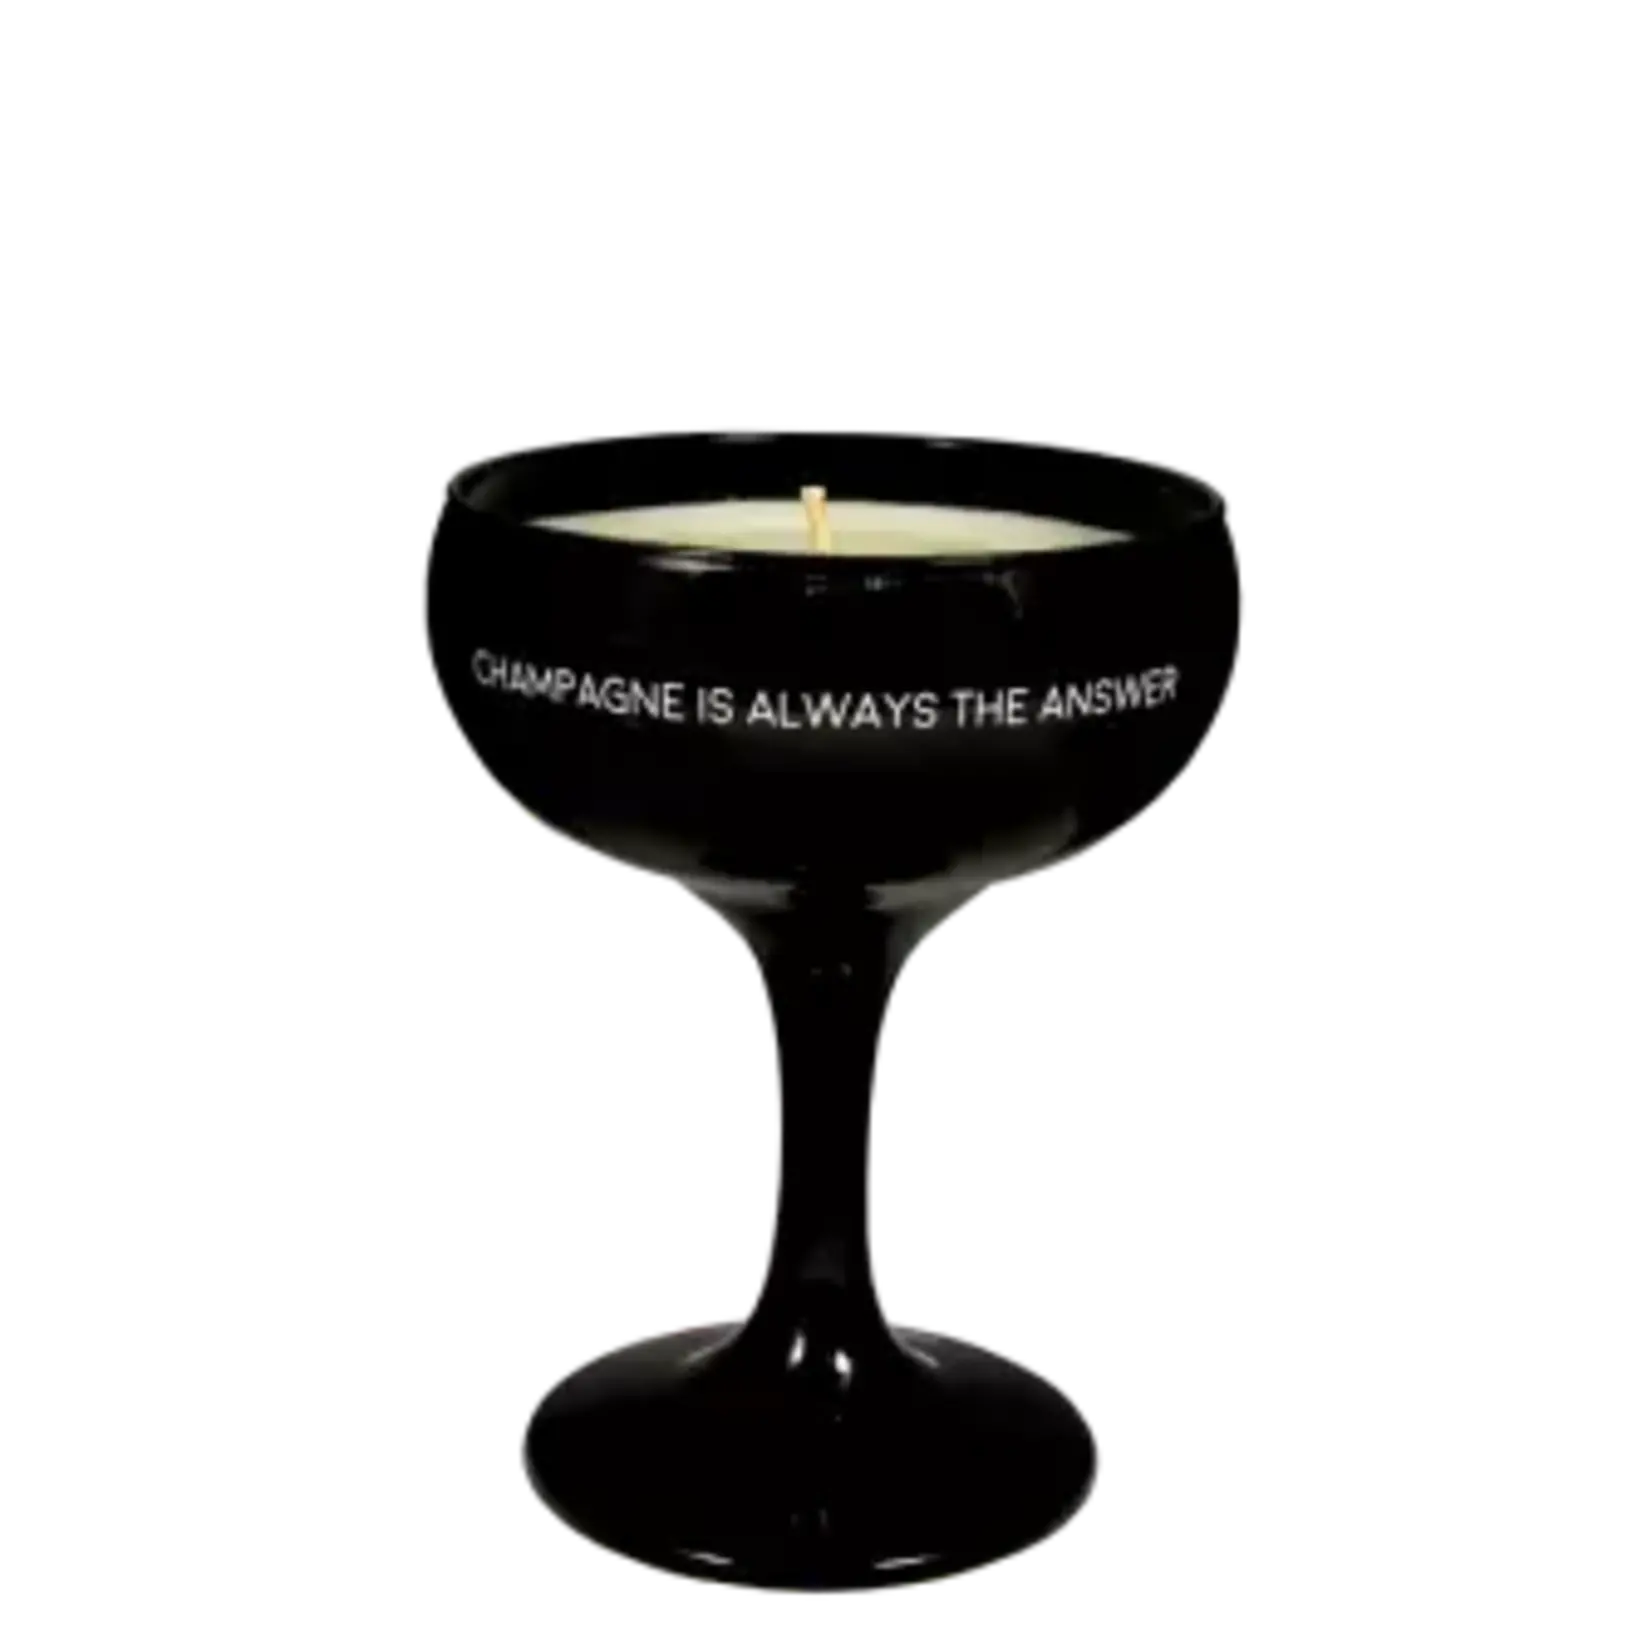 My Flame Sojakaars in champagneglas - Champagne is always the answer - Warm cashmere